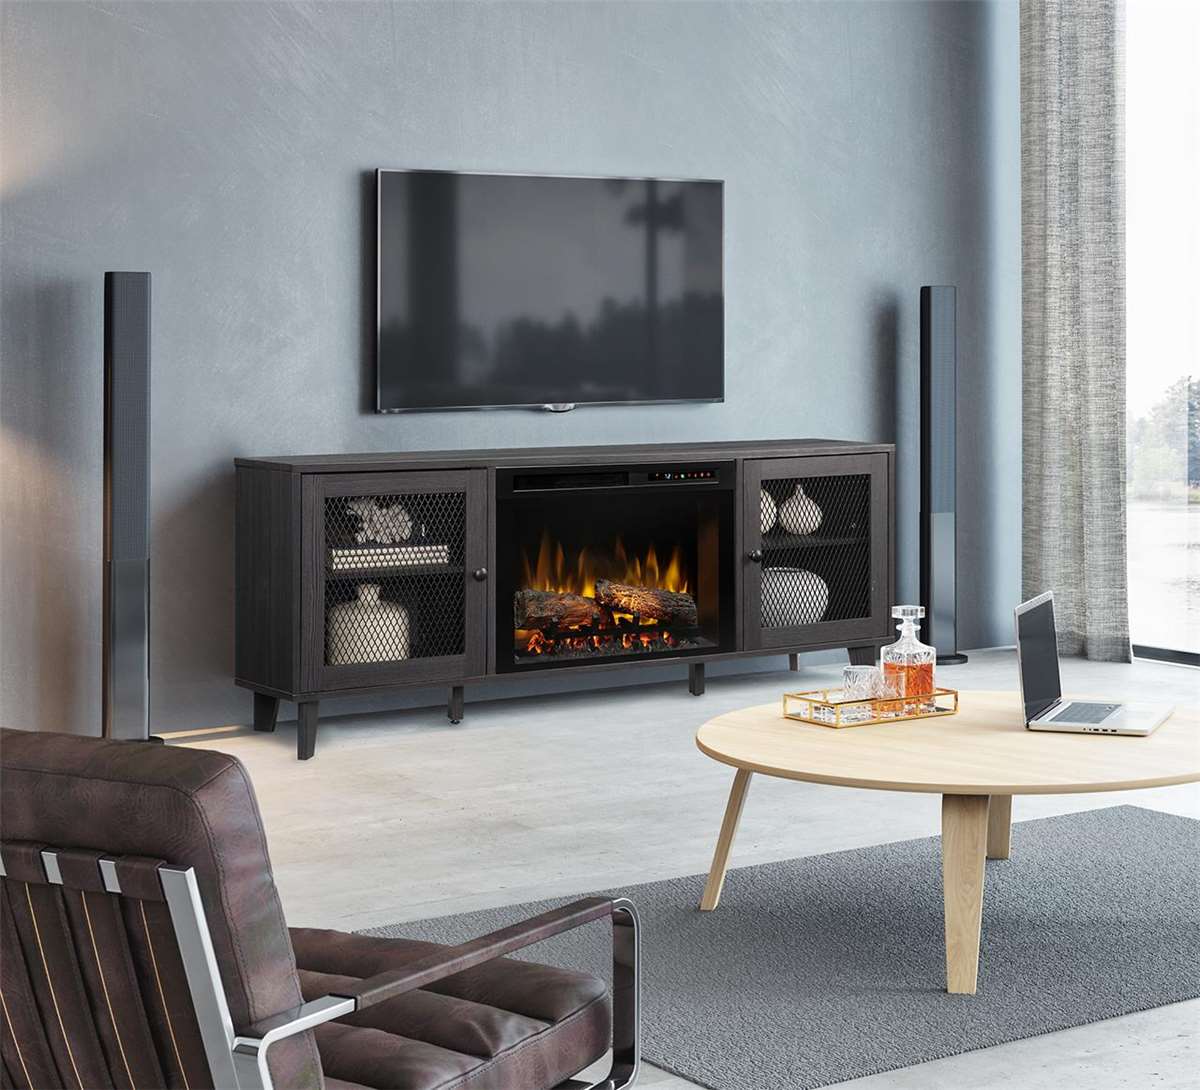 Dimplex Dean media console electric fireplace package with Realogs firebed options.